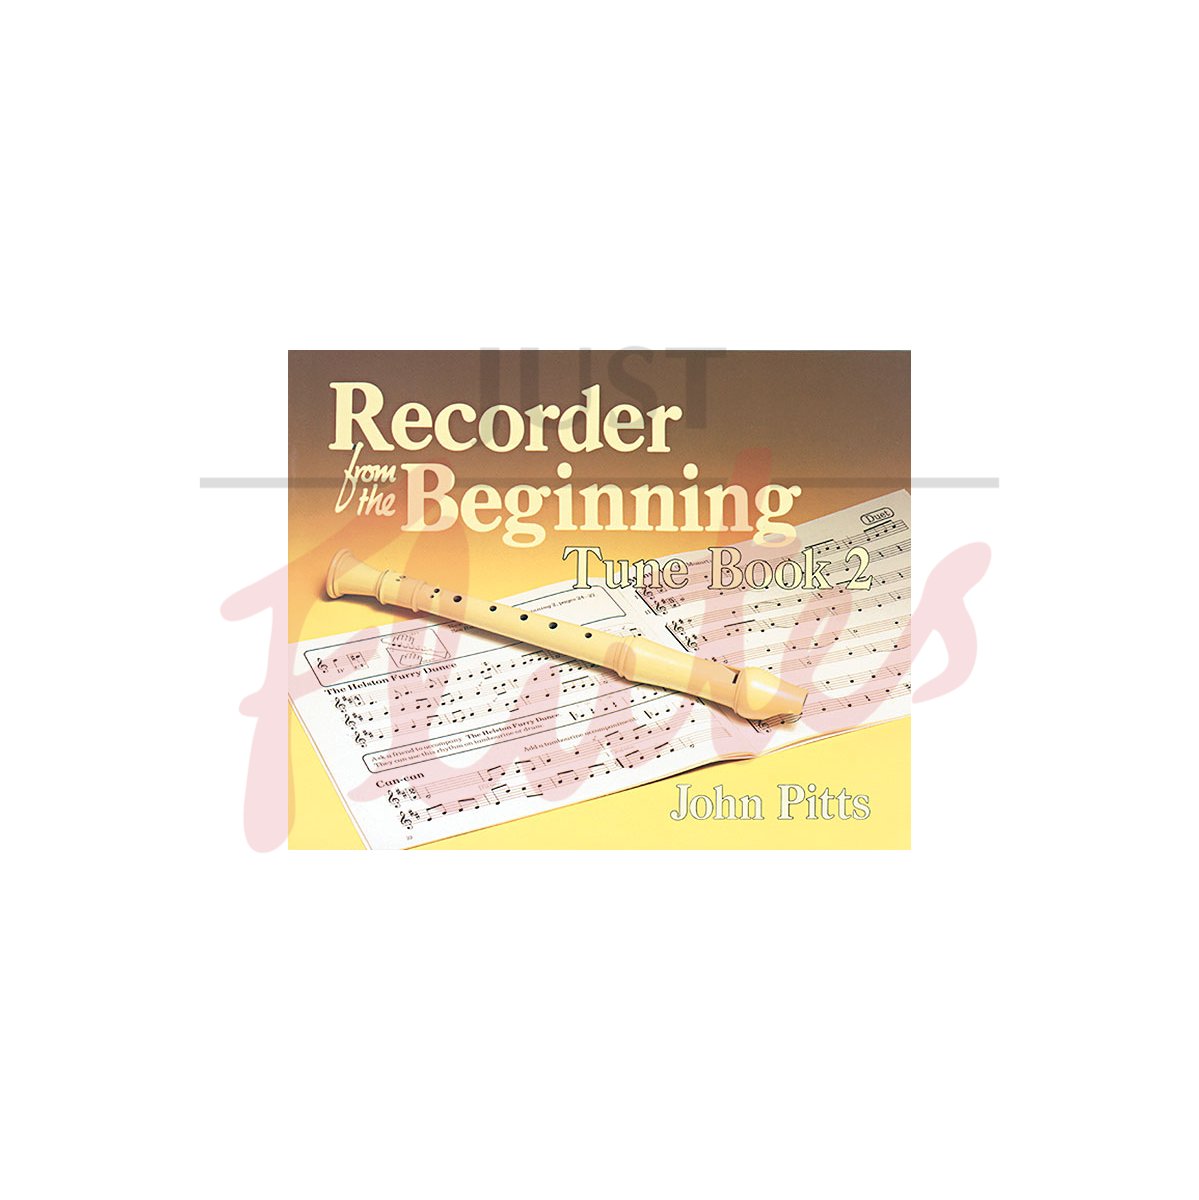 Recorder from the Beginning Tune Book 2